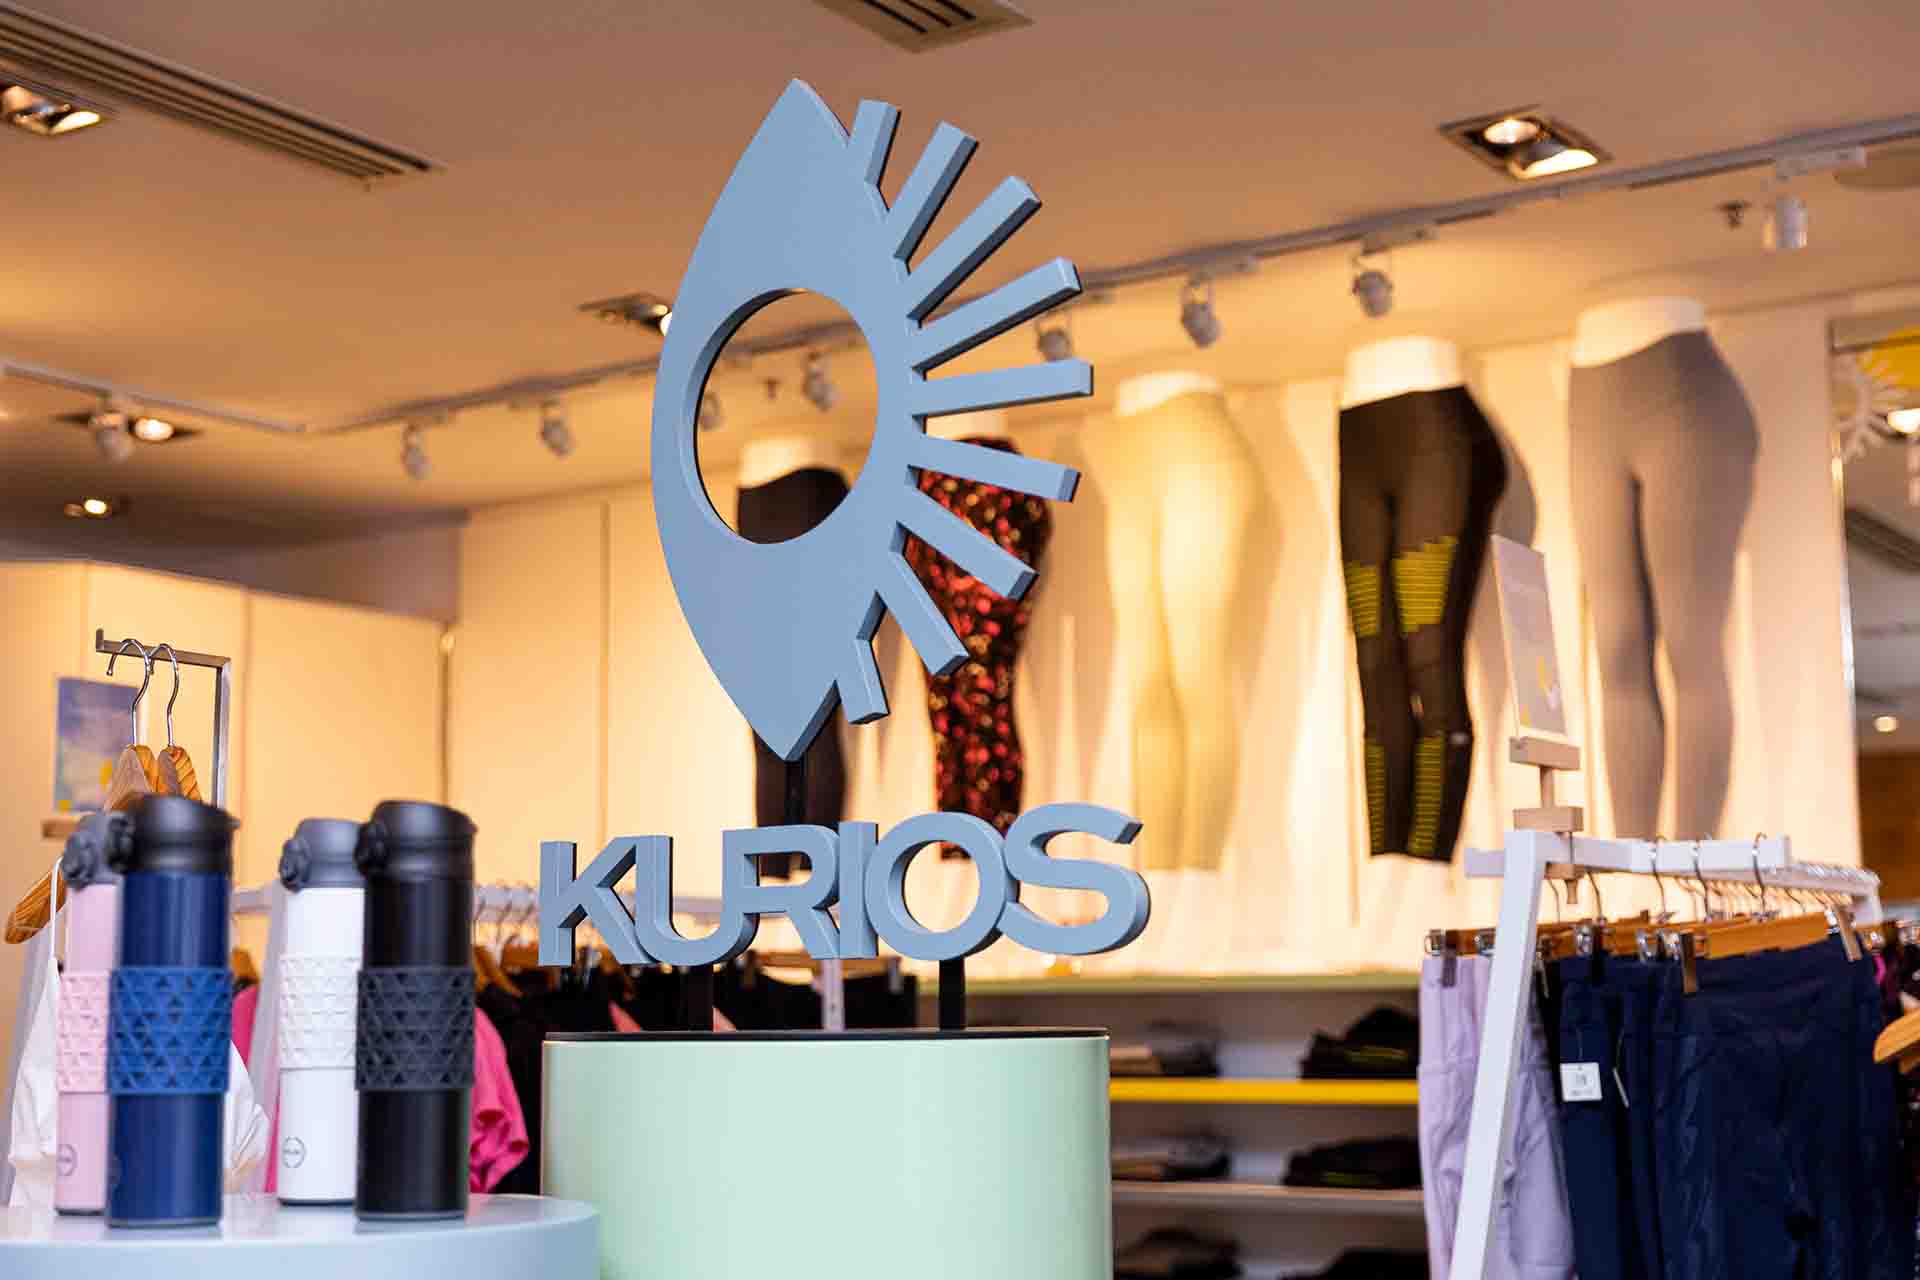 Kurios－ Brand new lifestyle and wellness store landed in Hong Kong